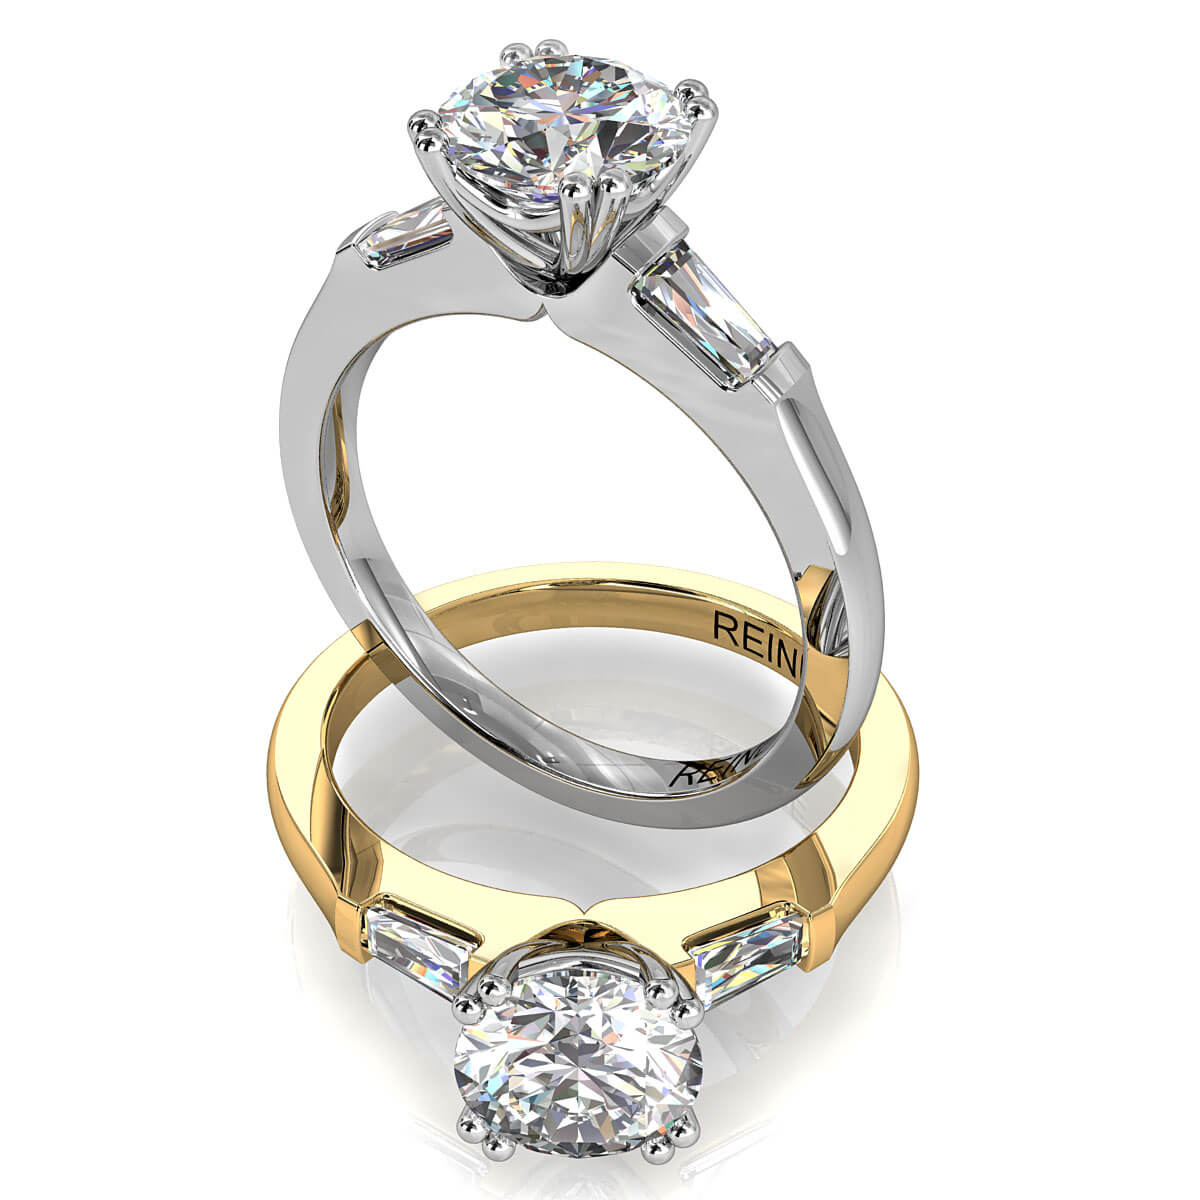 Round Brilliant Cut Diamond Trilogy Engagement Ring, Stones 4 Double Claw Set with Tapered Baguette Side Stones with a Classic Undersetting.